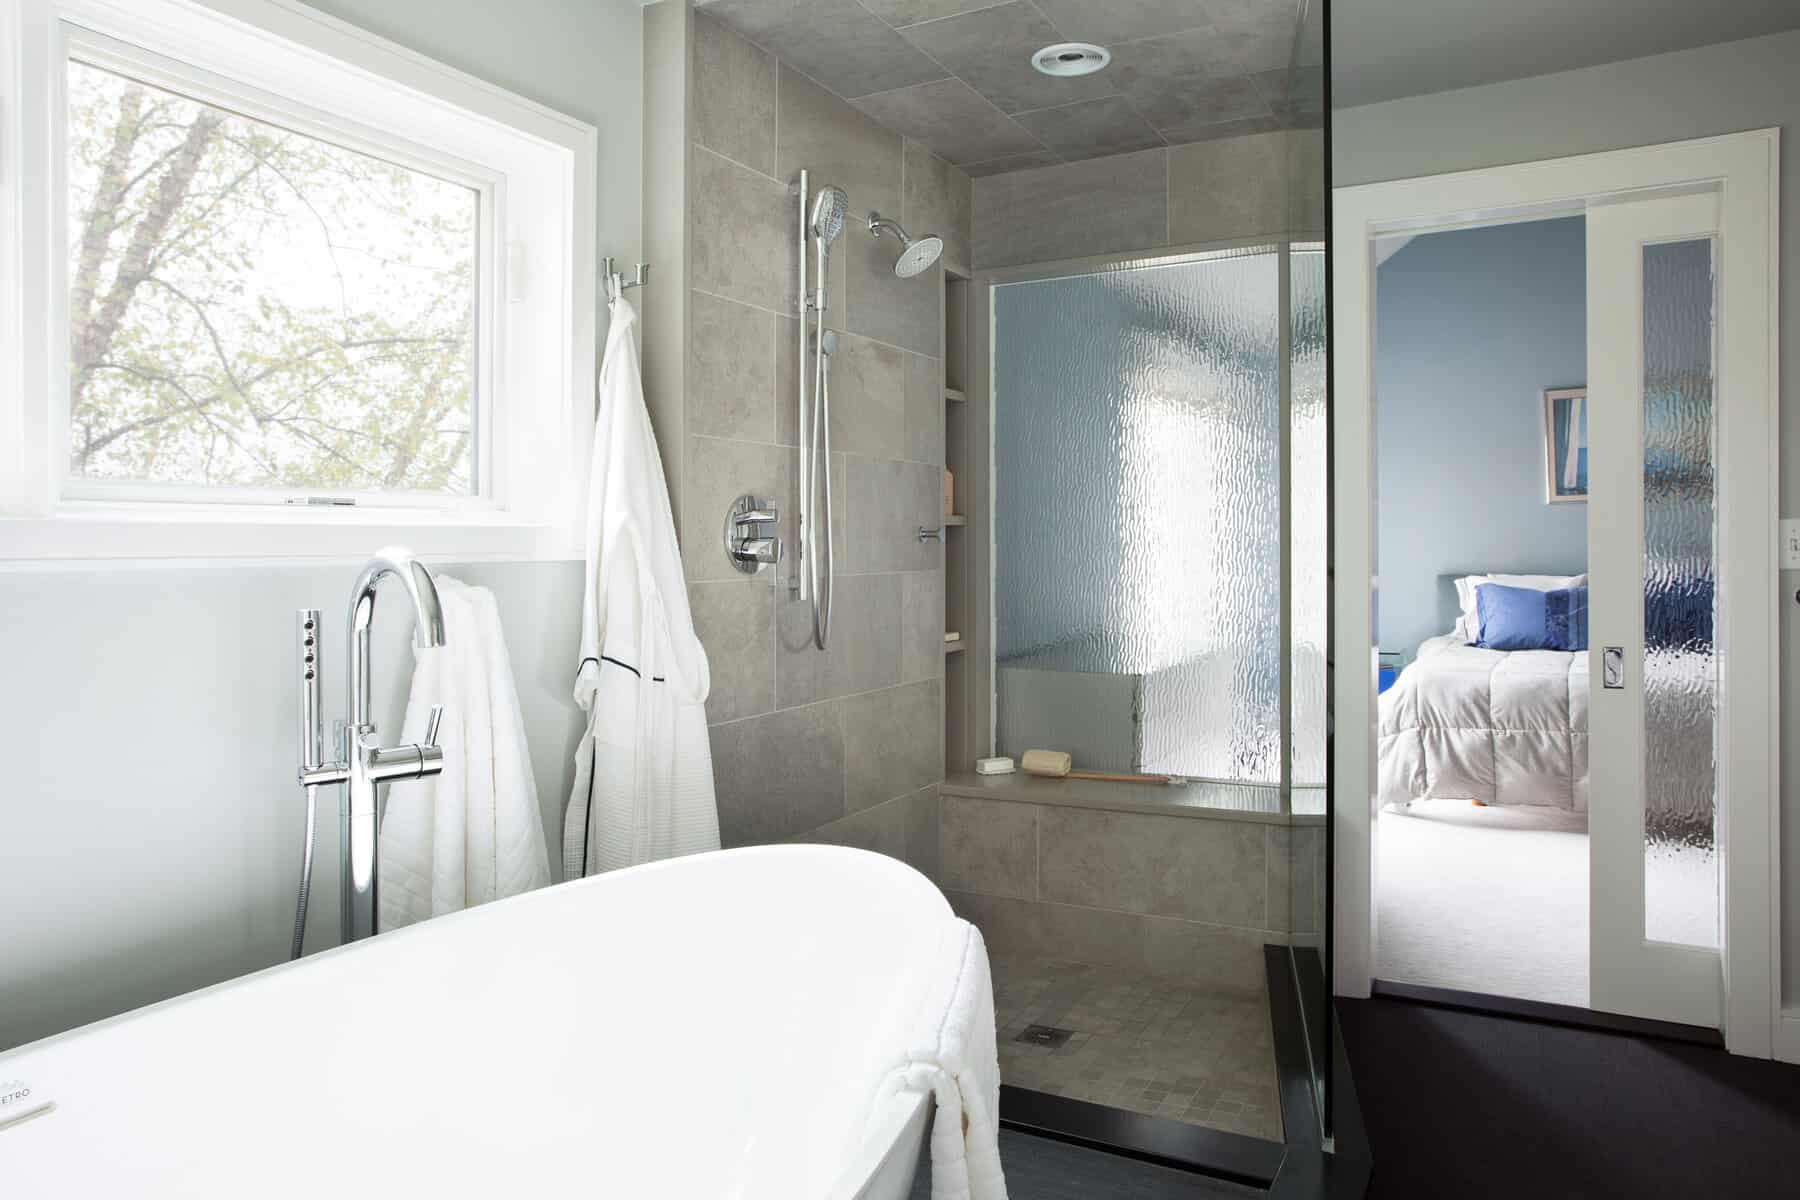 ANDOVER TOWNHOUSE MASTER BATH-The wavevue glass in the shower window and pocket door create a transparent and architecturally interesting connection between the bath and master bedroom, while still allowing for privacy. 2017 Designer Bath Shine award for best spa bath.